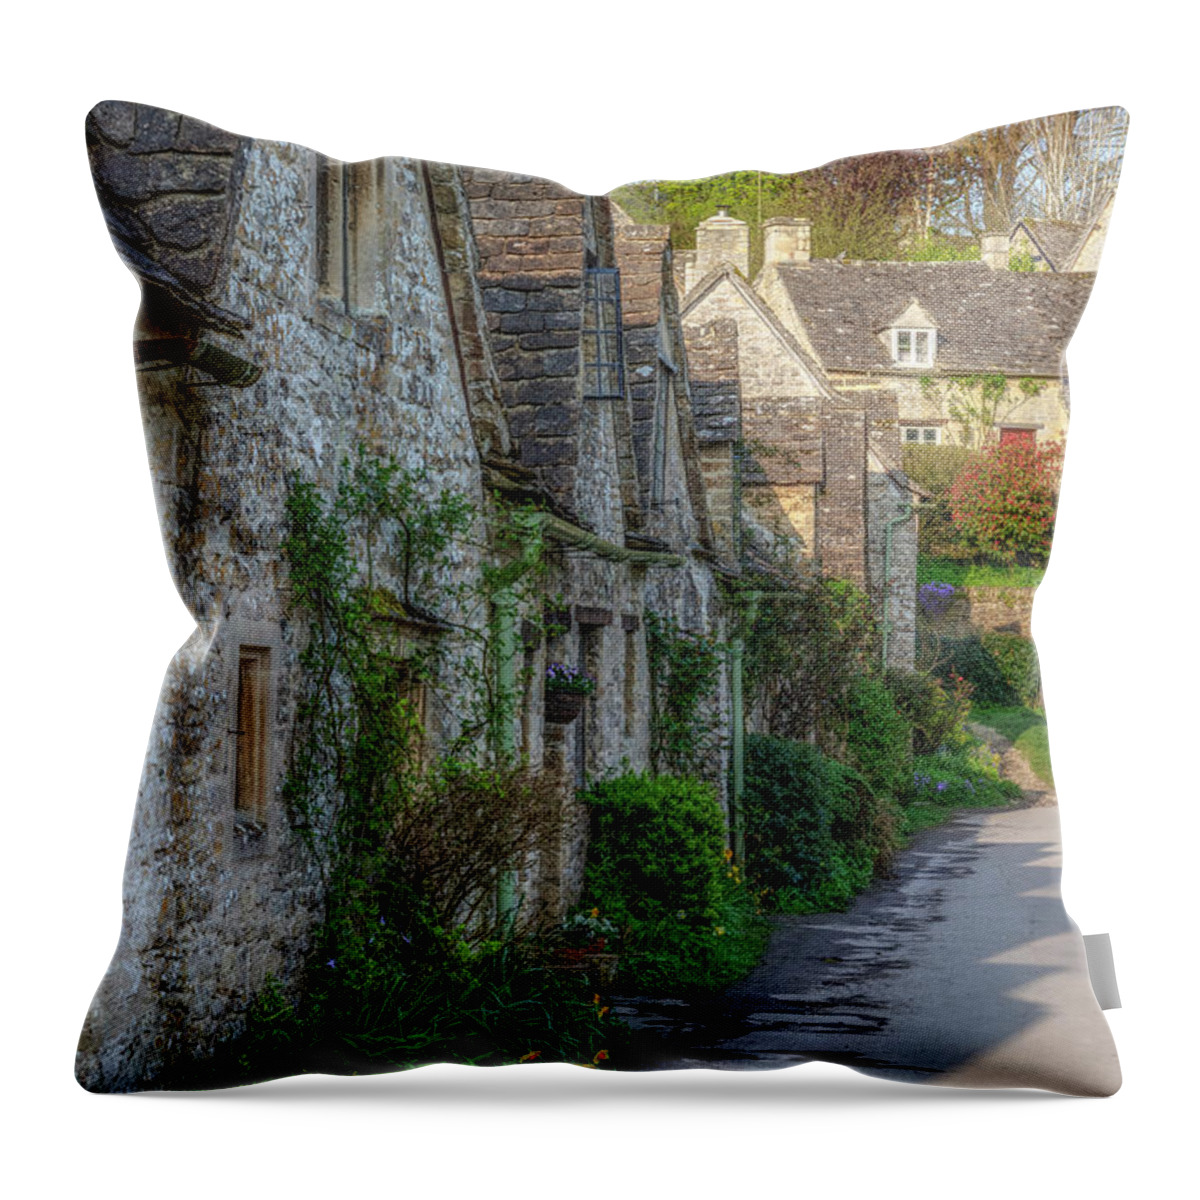 Bibury Throw Pillow featuring the photograph Bibury - Cotswolds #1 by Joana Kruse